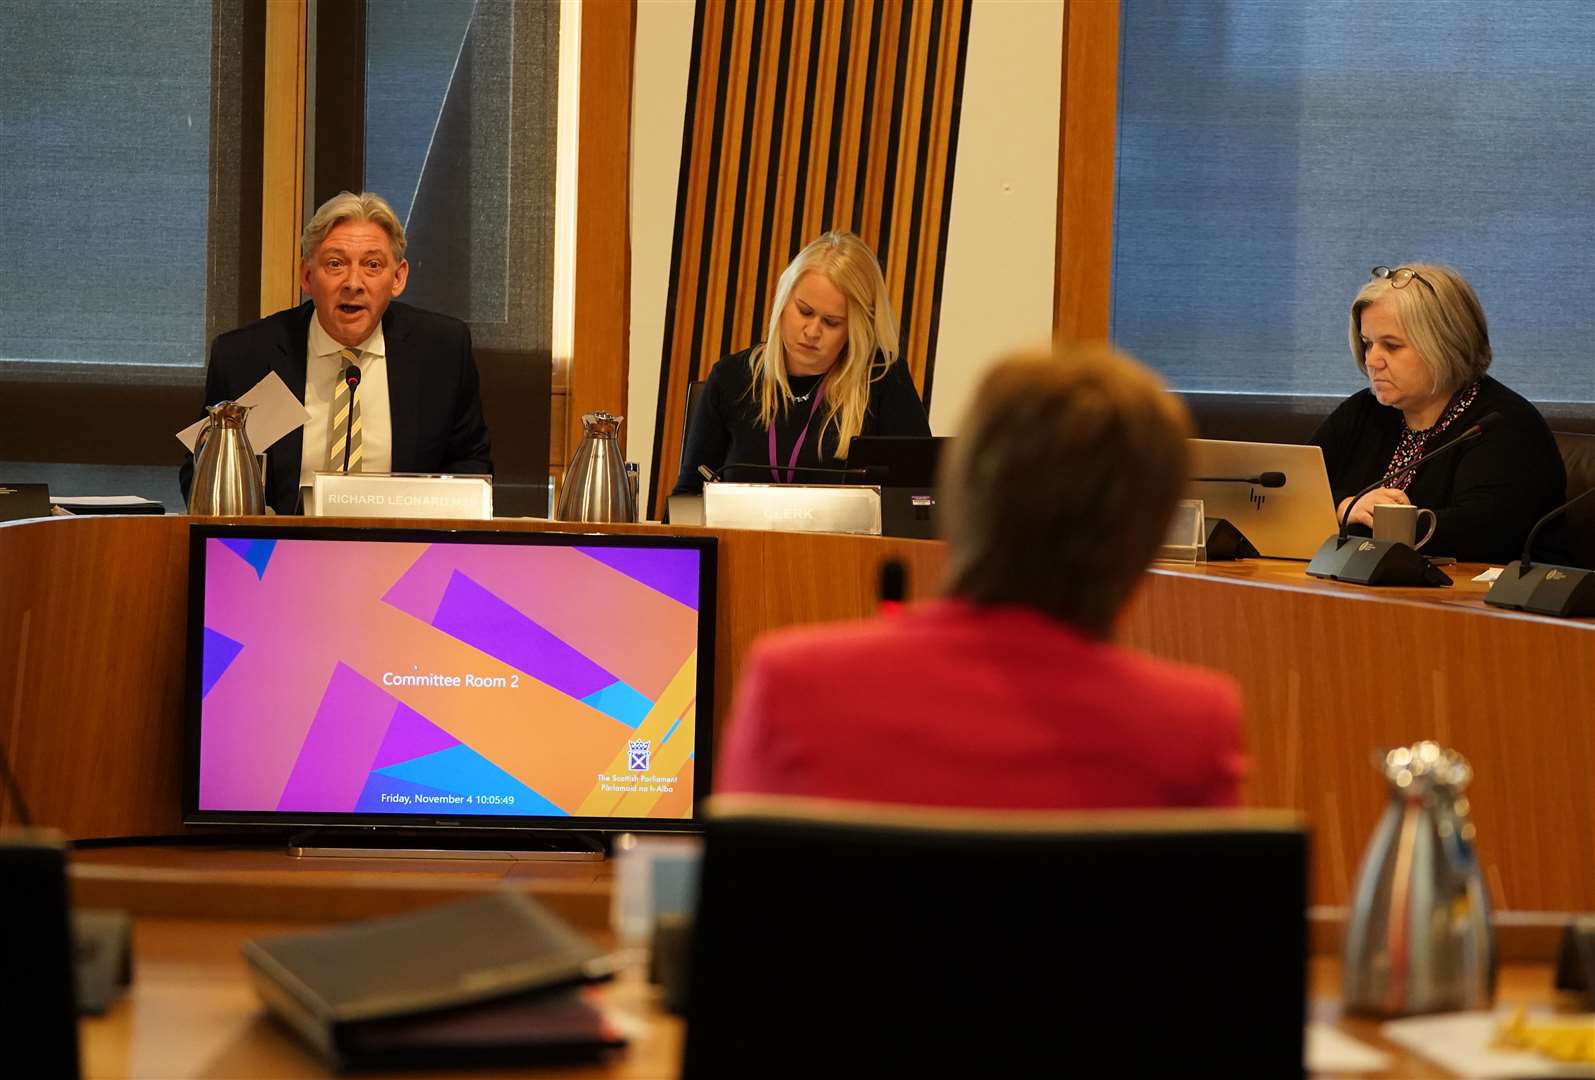 Richard Leonard said key paragraphs of a submission had been cut (Andrew Milligan/PA)